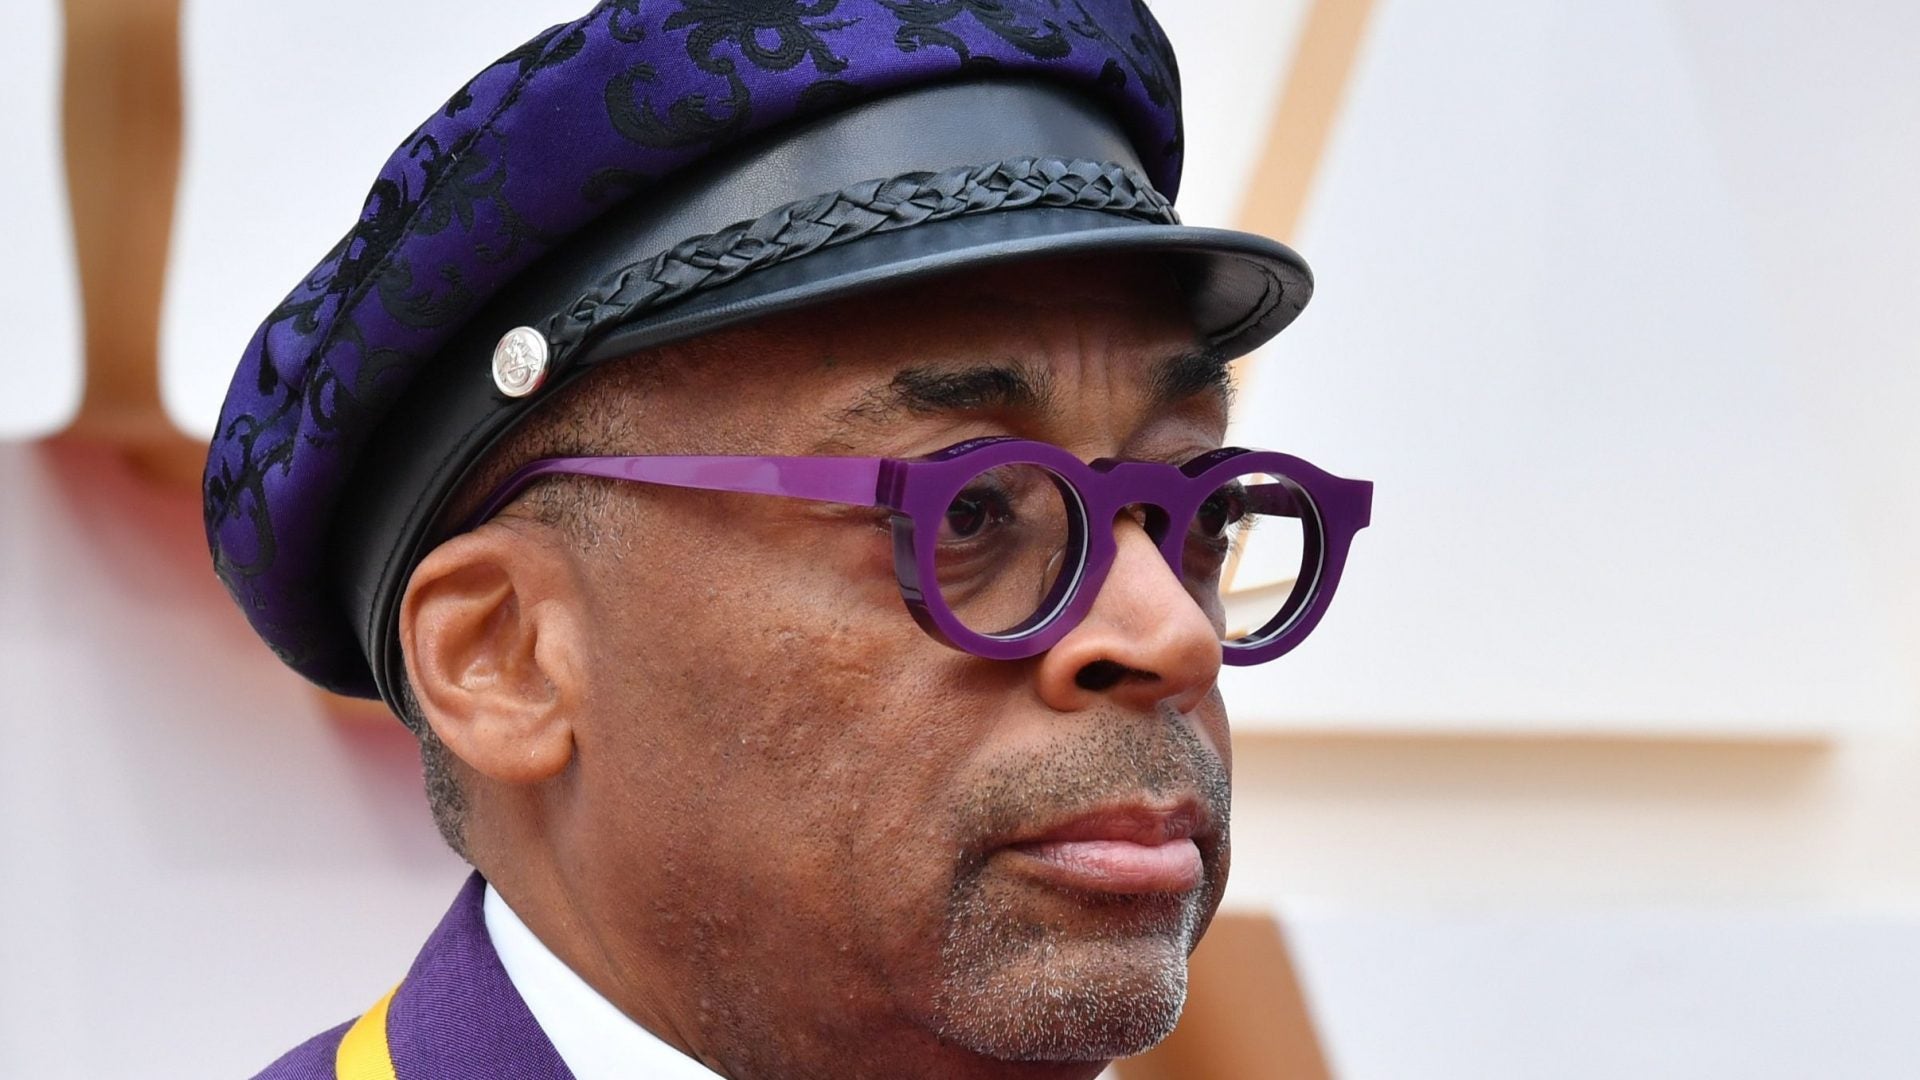 Spike Lee Pays Tribute To Kobe Bryant On Oscars Red Carpet